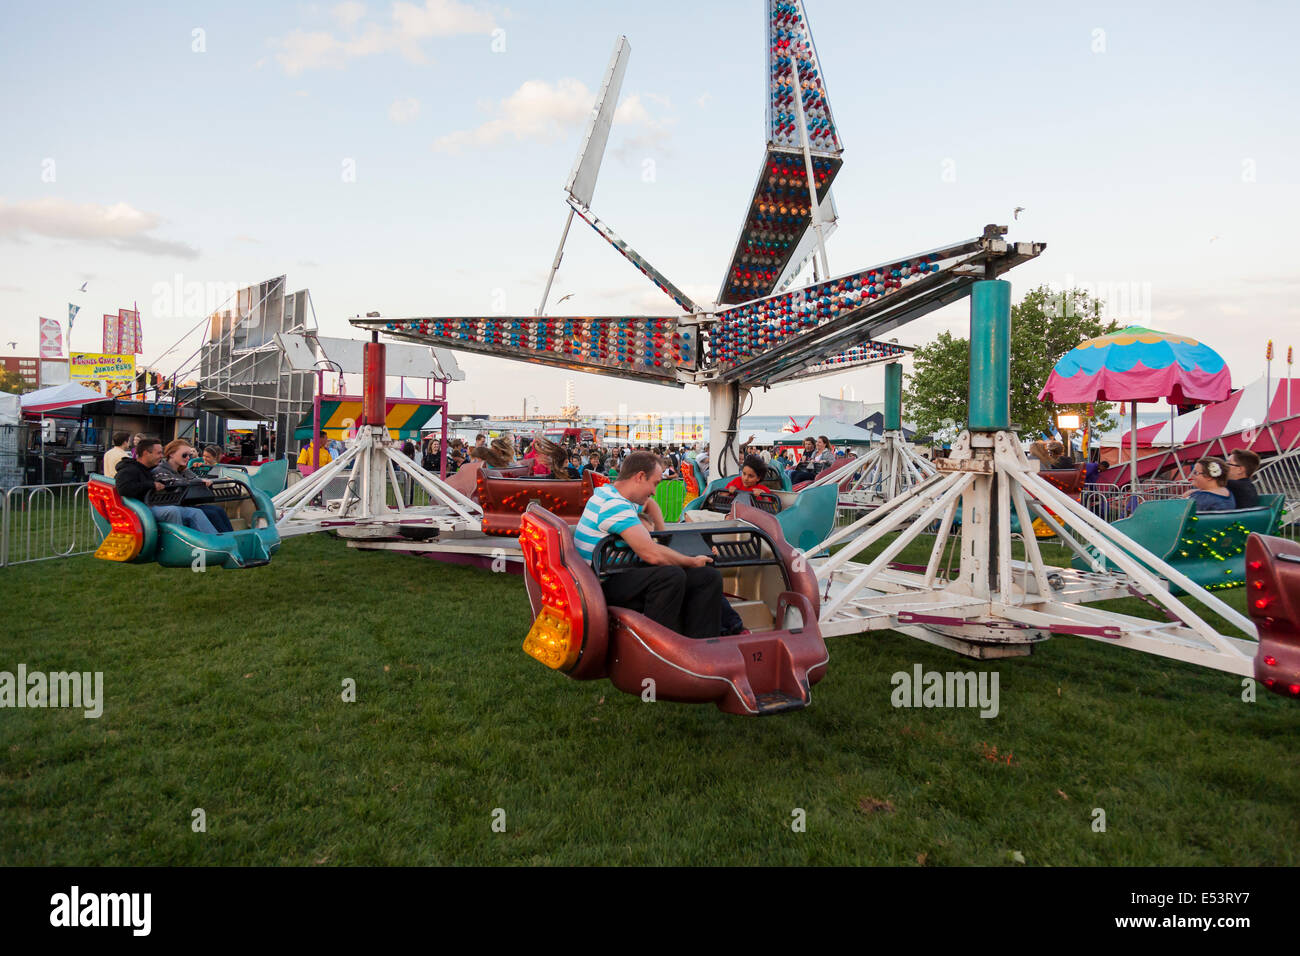 People enjoying the 'Sizzler' ride at the 'Sound of Music Festival' at Spencer Smith Park in Burlington, Ontario, Canada. Stock Photo